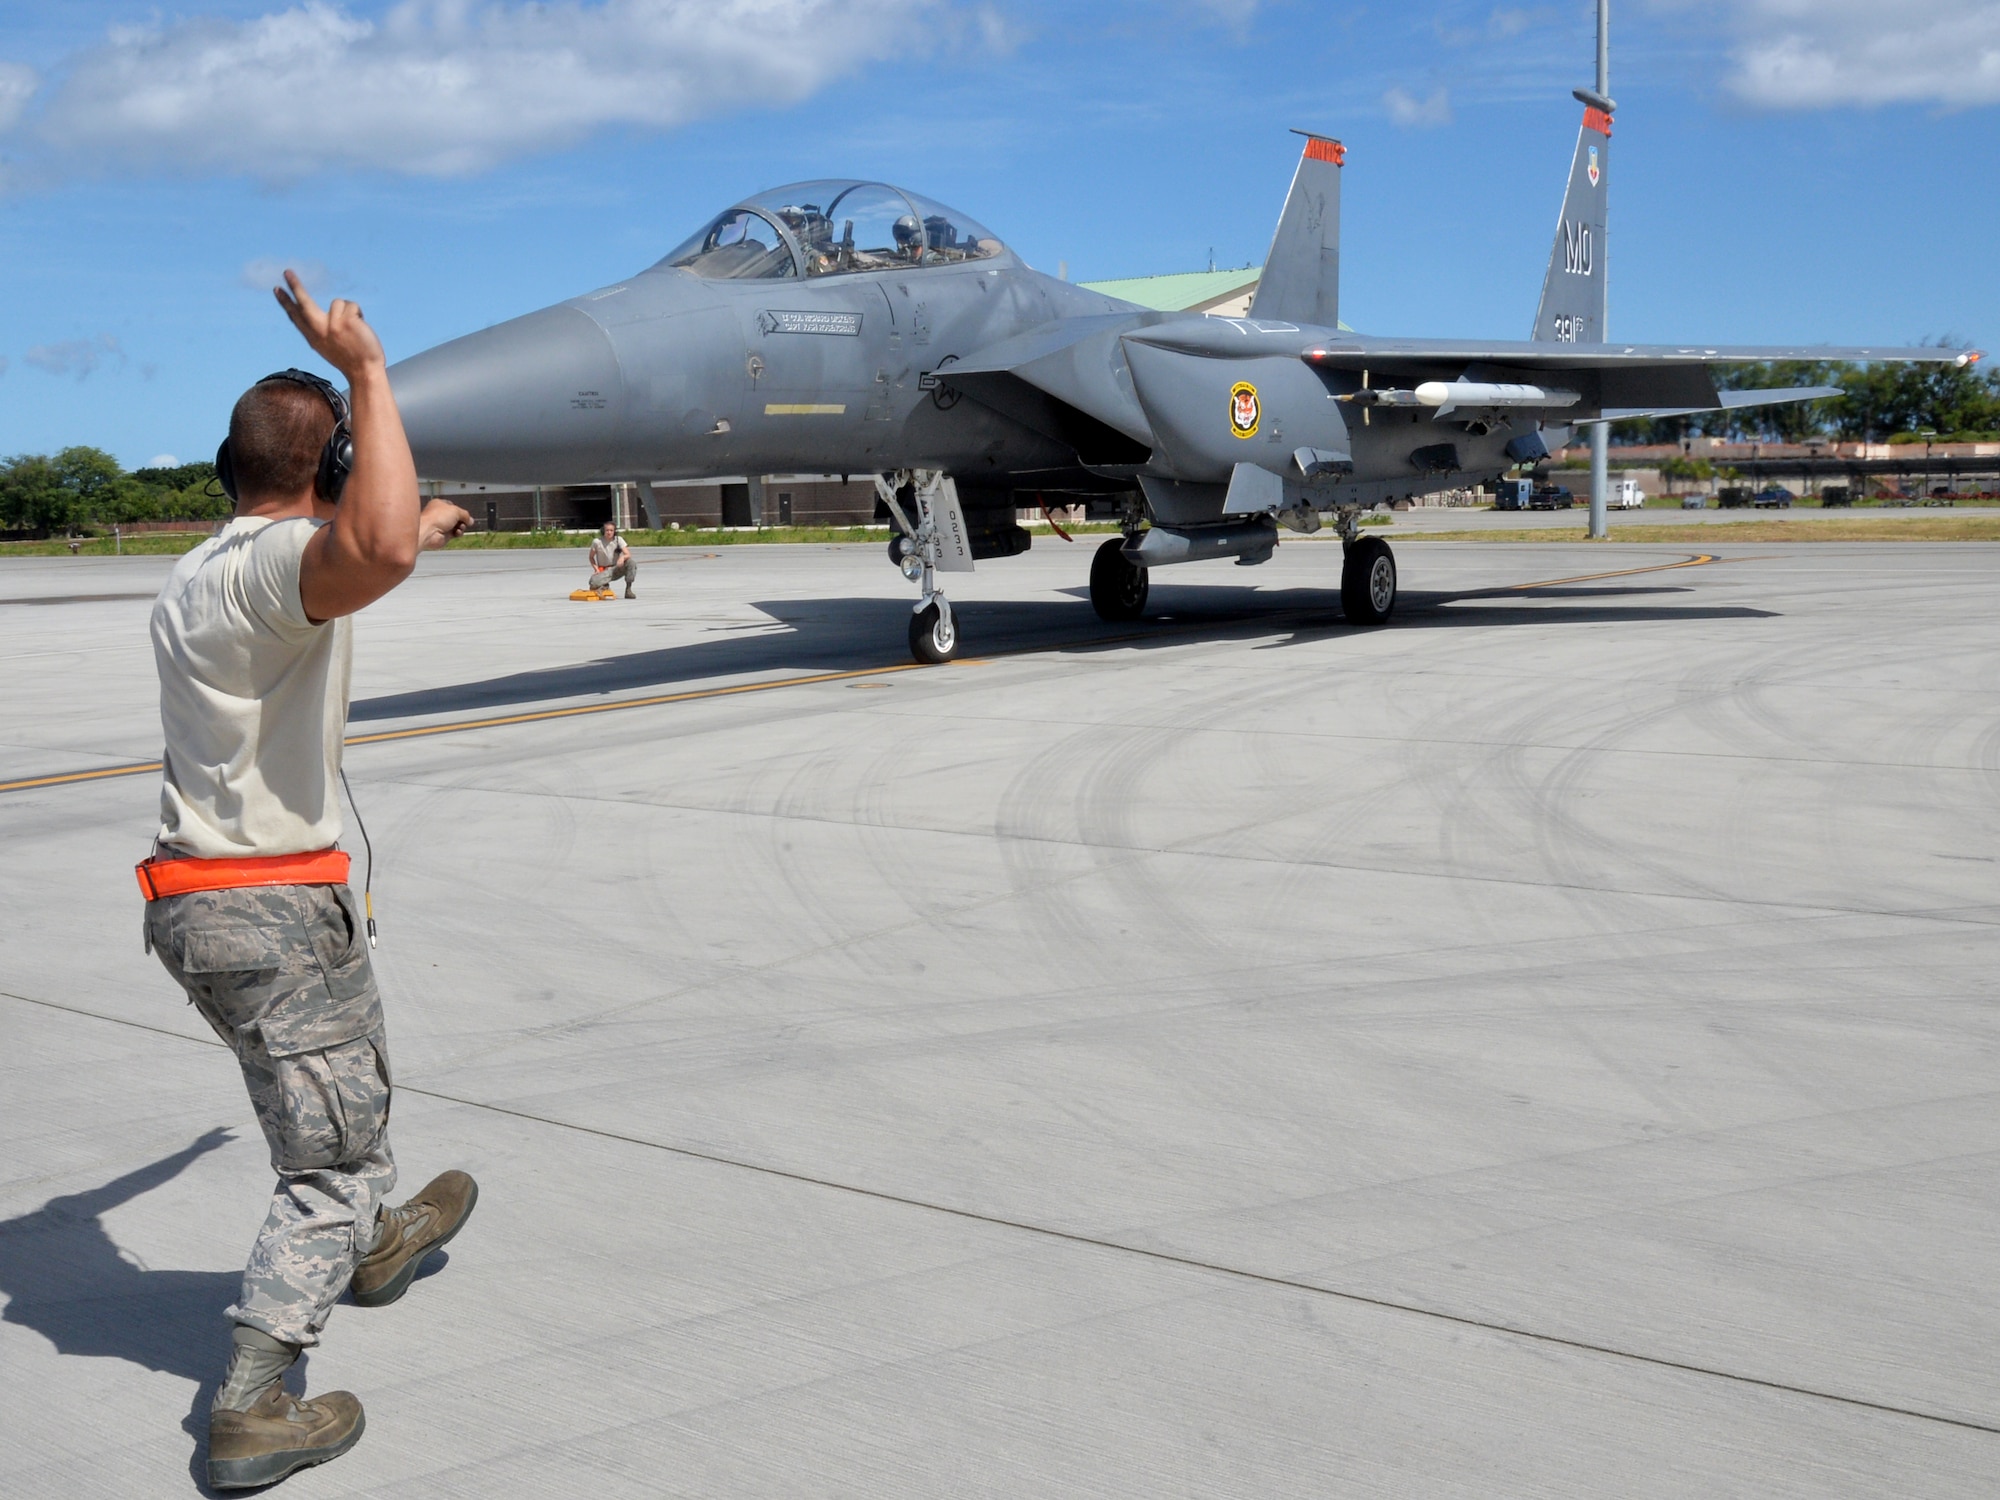 Senior Airman Kenneth Comfort  guides an F-15E Strike Eagle during a mission July 16, 2014, at Joint Base Pearl Harbor-Hickam, Hawaii. The 391st Fighter Squadron is currently on a two-month deployment here from Mountain Home Air Force Base, Idaho. While here, the squadron’s F-15Es have participated in Rim of the Pacific 2014 exercise missions. RIMPAC is a U.S. Pacific Command-hosted biennial multinational maritime exercise designed to foster and sustain international cooperation on the security of the world’s oceans. Comfort is a 391st FS crew chief. (U.S. Air Force photo/Staff Sgt. Alexander Martinez)